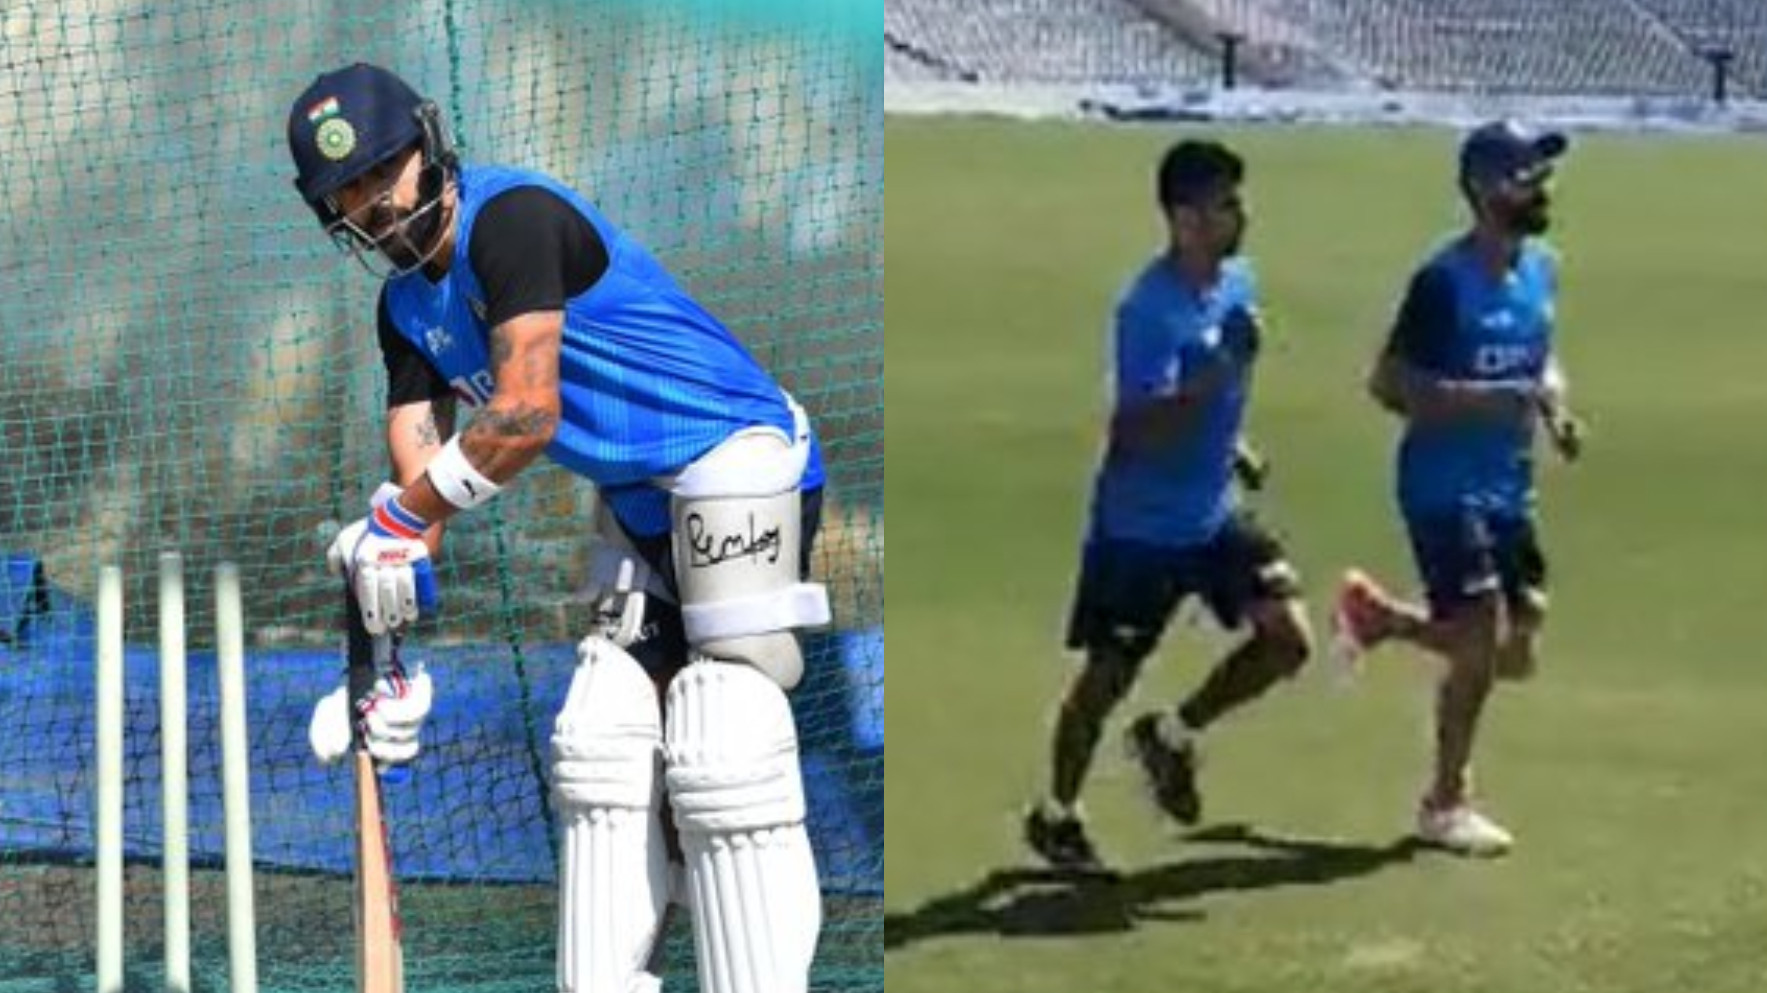 IND v SL 2022: WATCH- Virat Kohli hits the nets in preparation for his 100th Test in Mohali